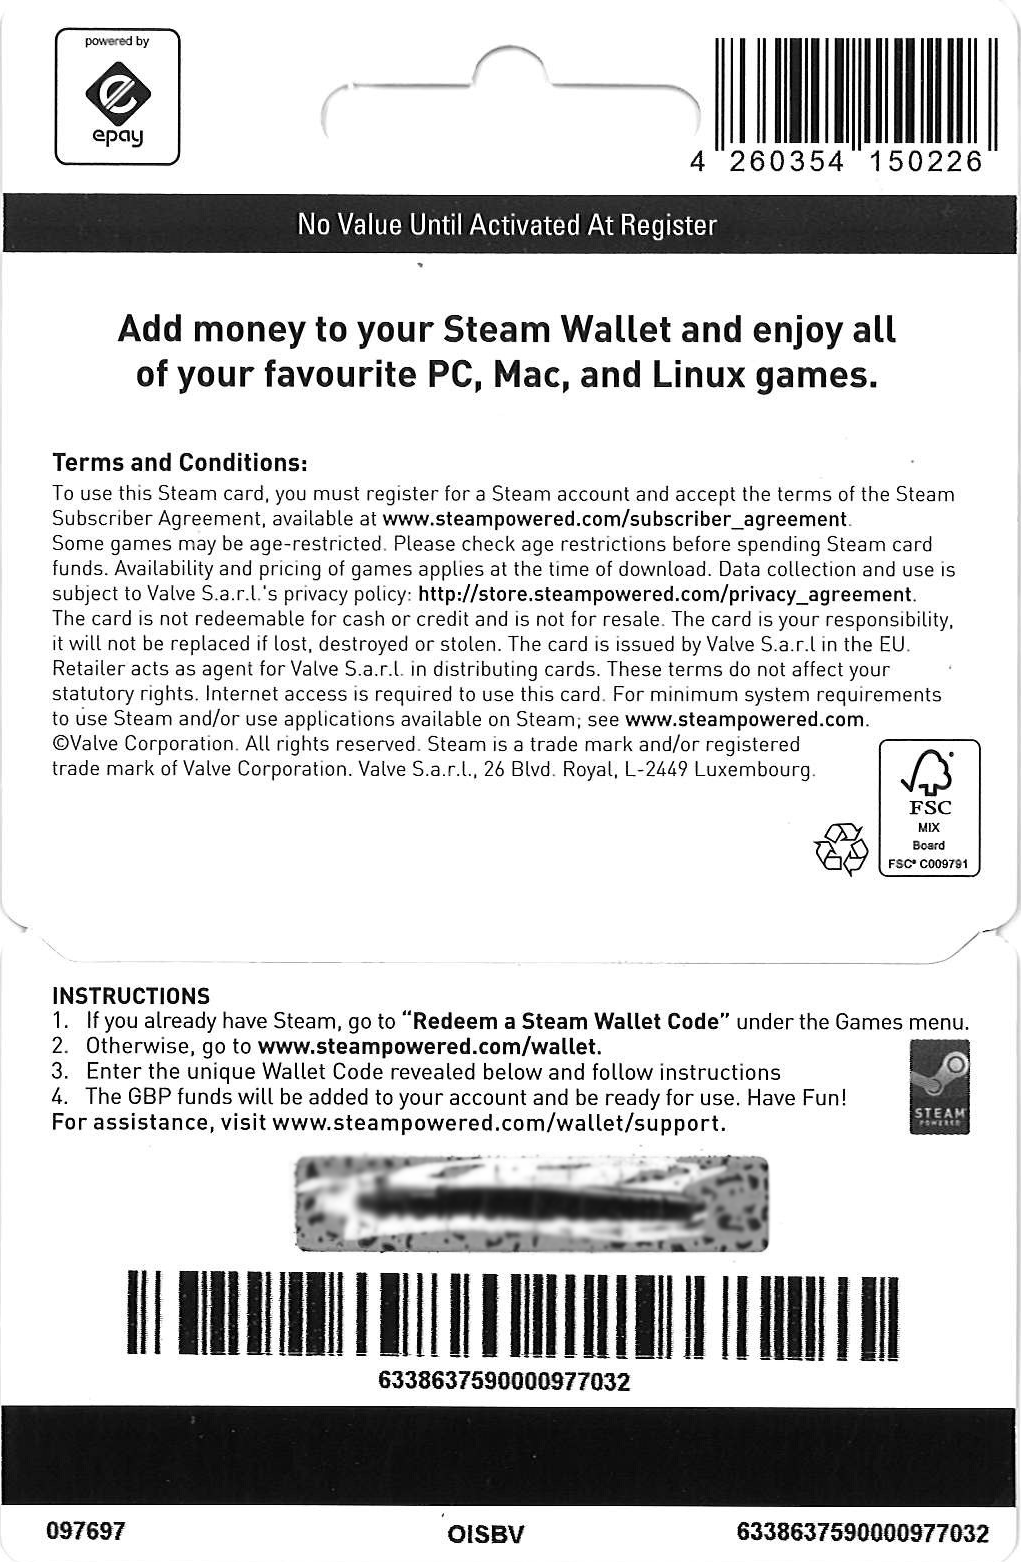 US retailer is now giving away $100 Steam Gift cards with all